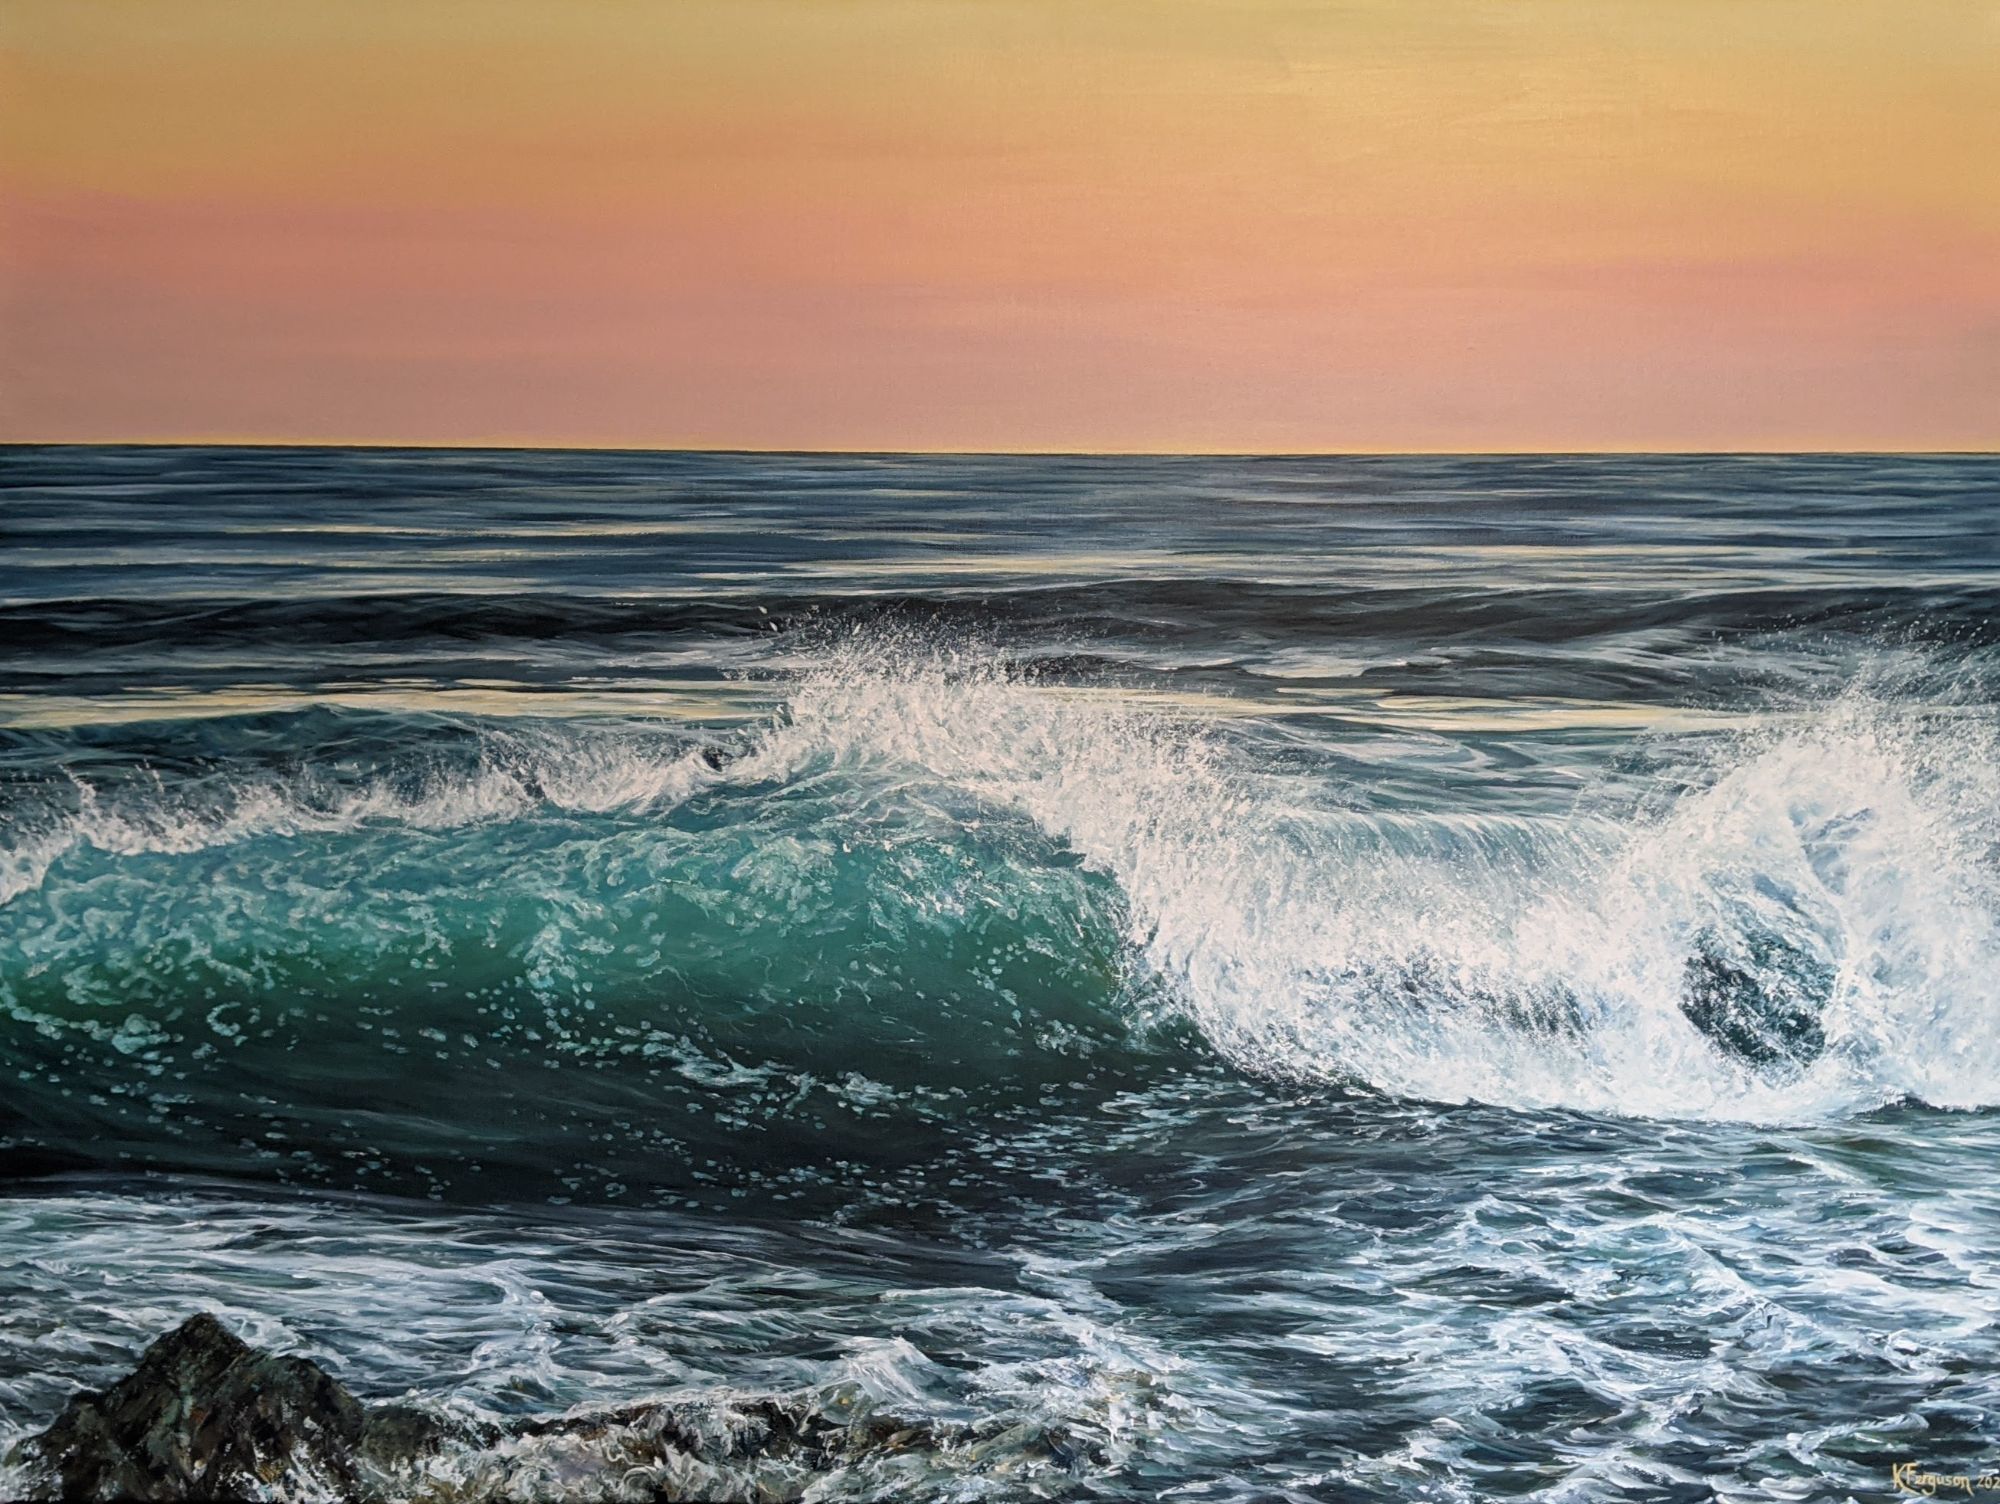 Acrylic painting of a wave at daybreak